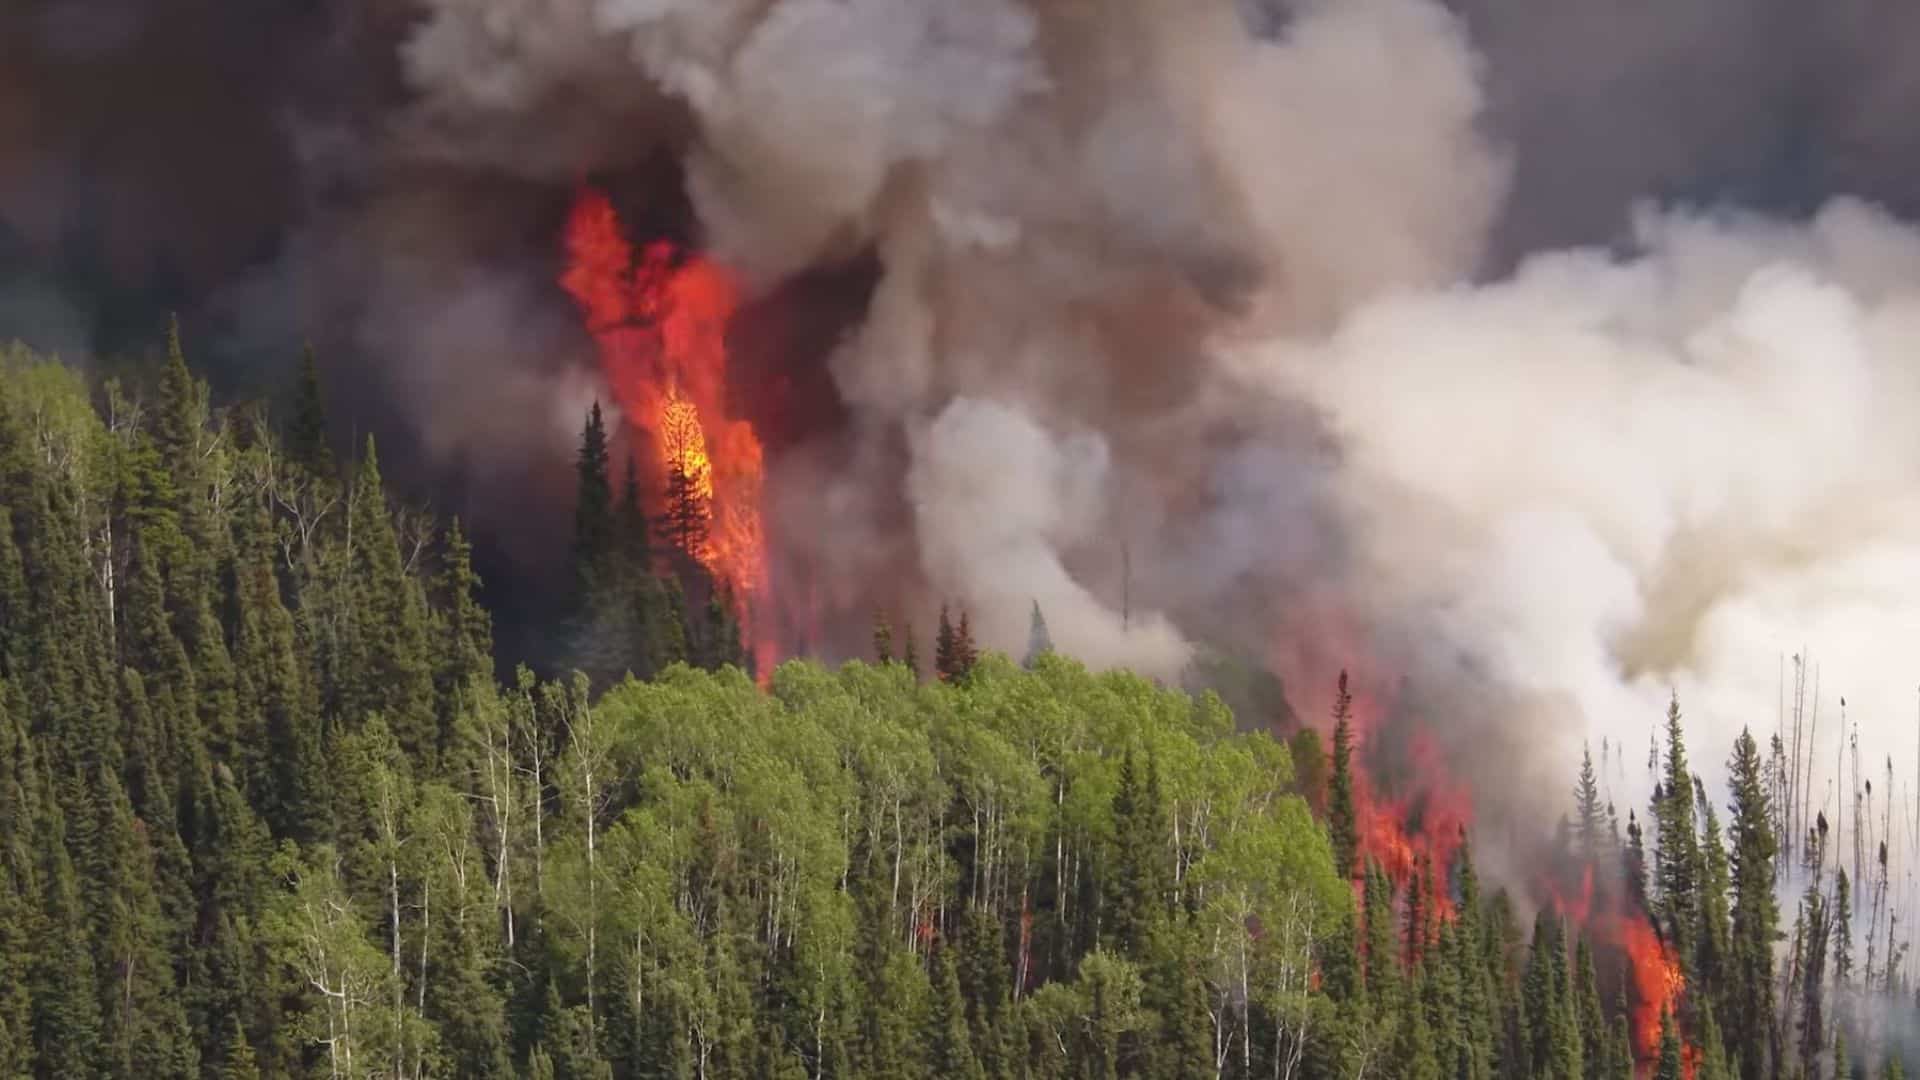 The mayor of Fort Nelson, B.C., has reported that the wildfire is currently only 1.5 kilometers away from the town